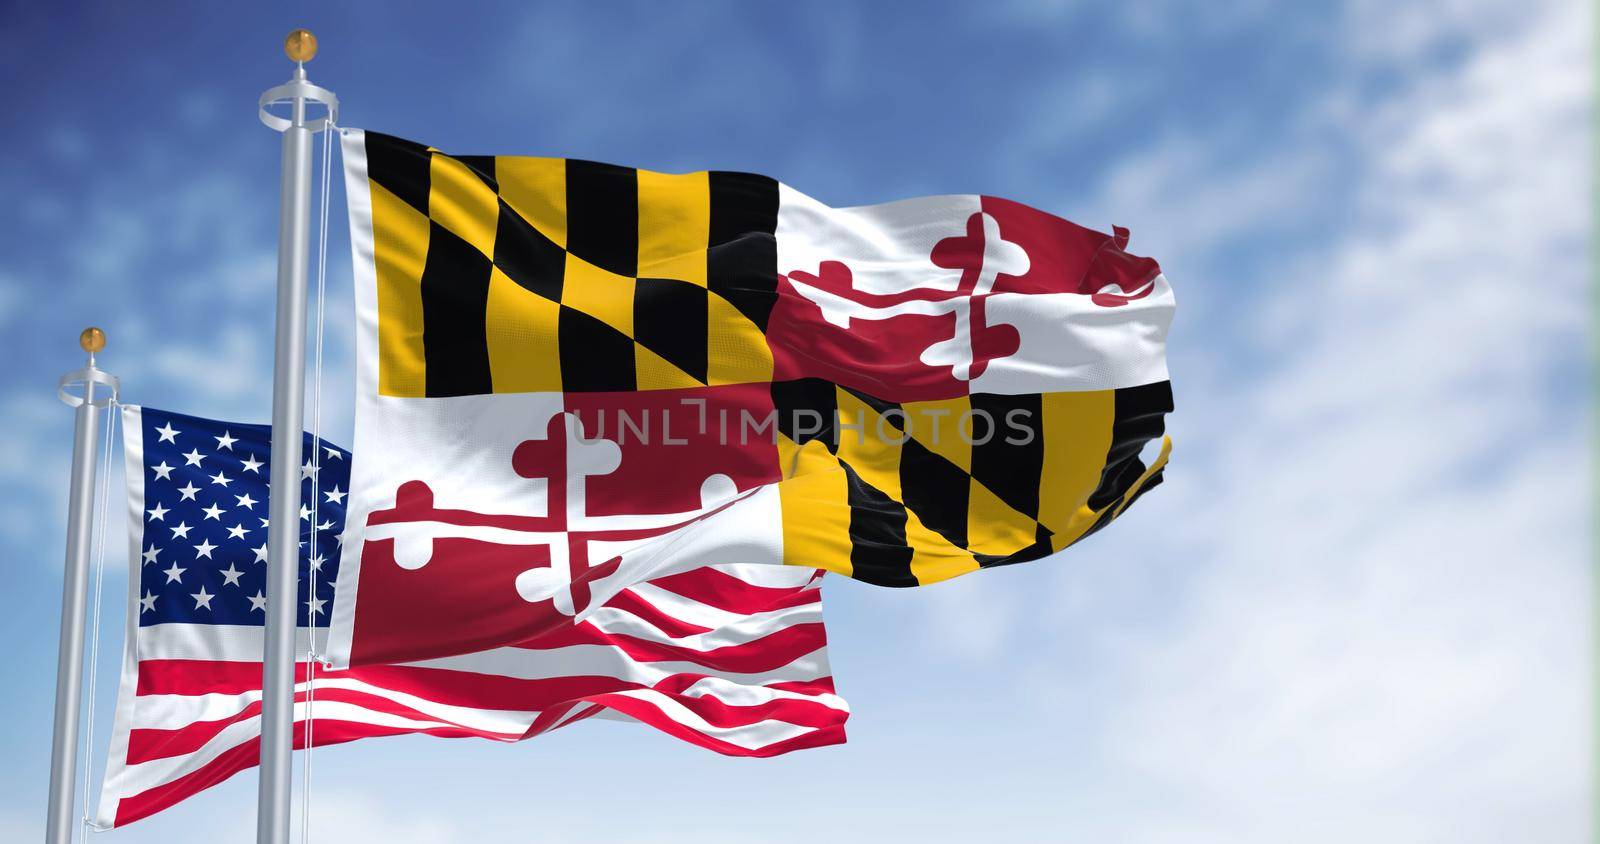 The Maryland state flag waving along with the national flag of the United States of America by rarrarorro